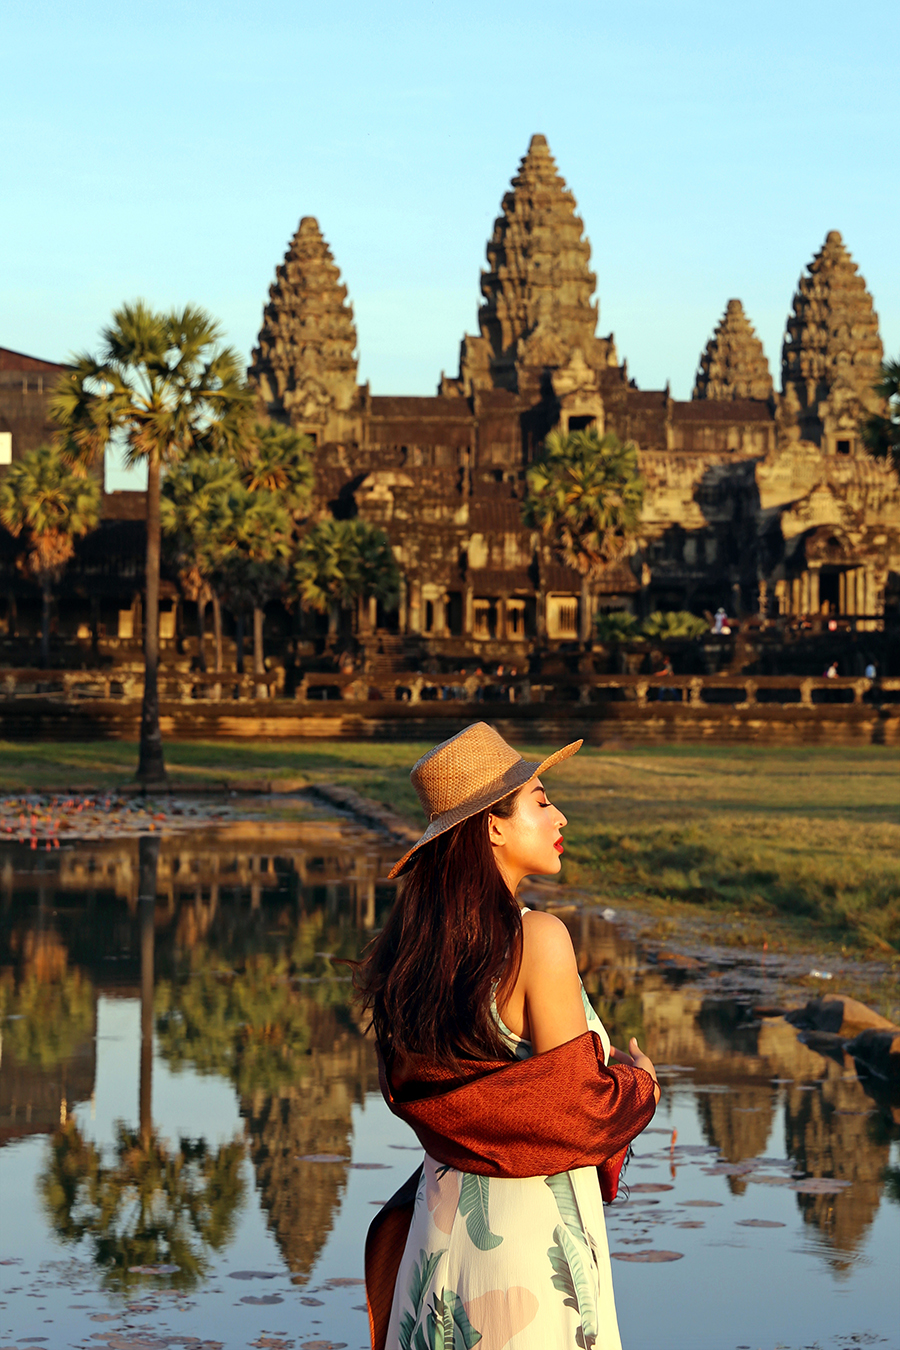 Siem Reap, Cambodia: Why sunset is better than sunrise at Angkor Wat